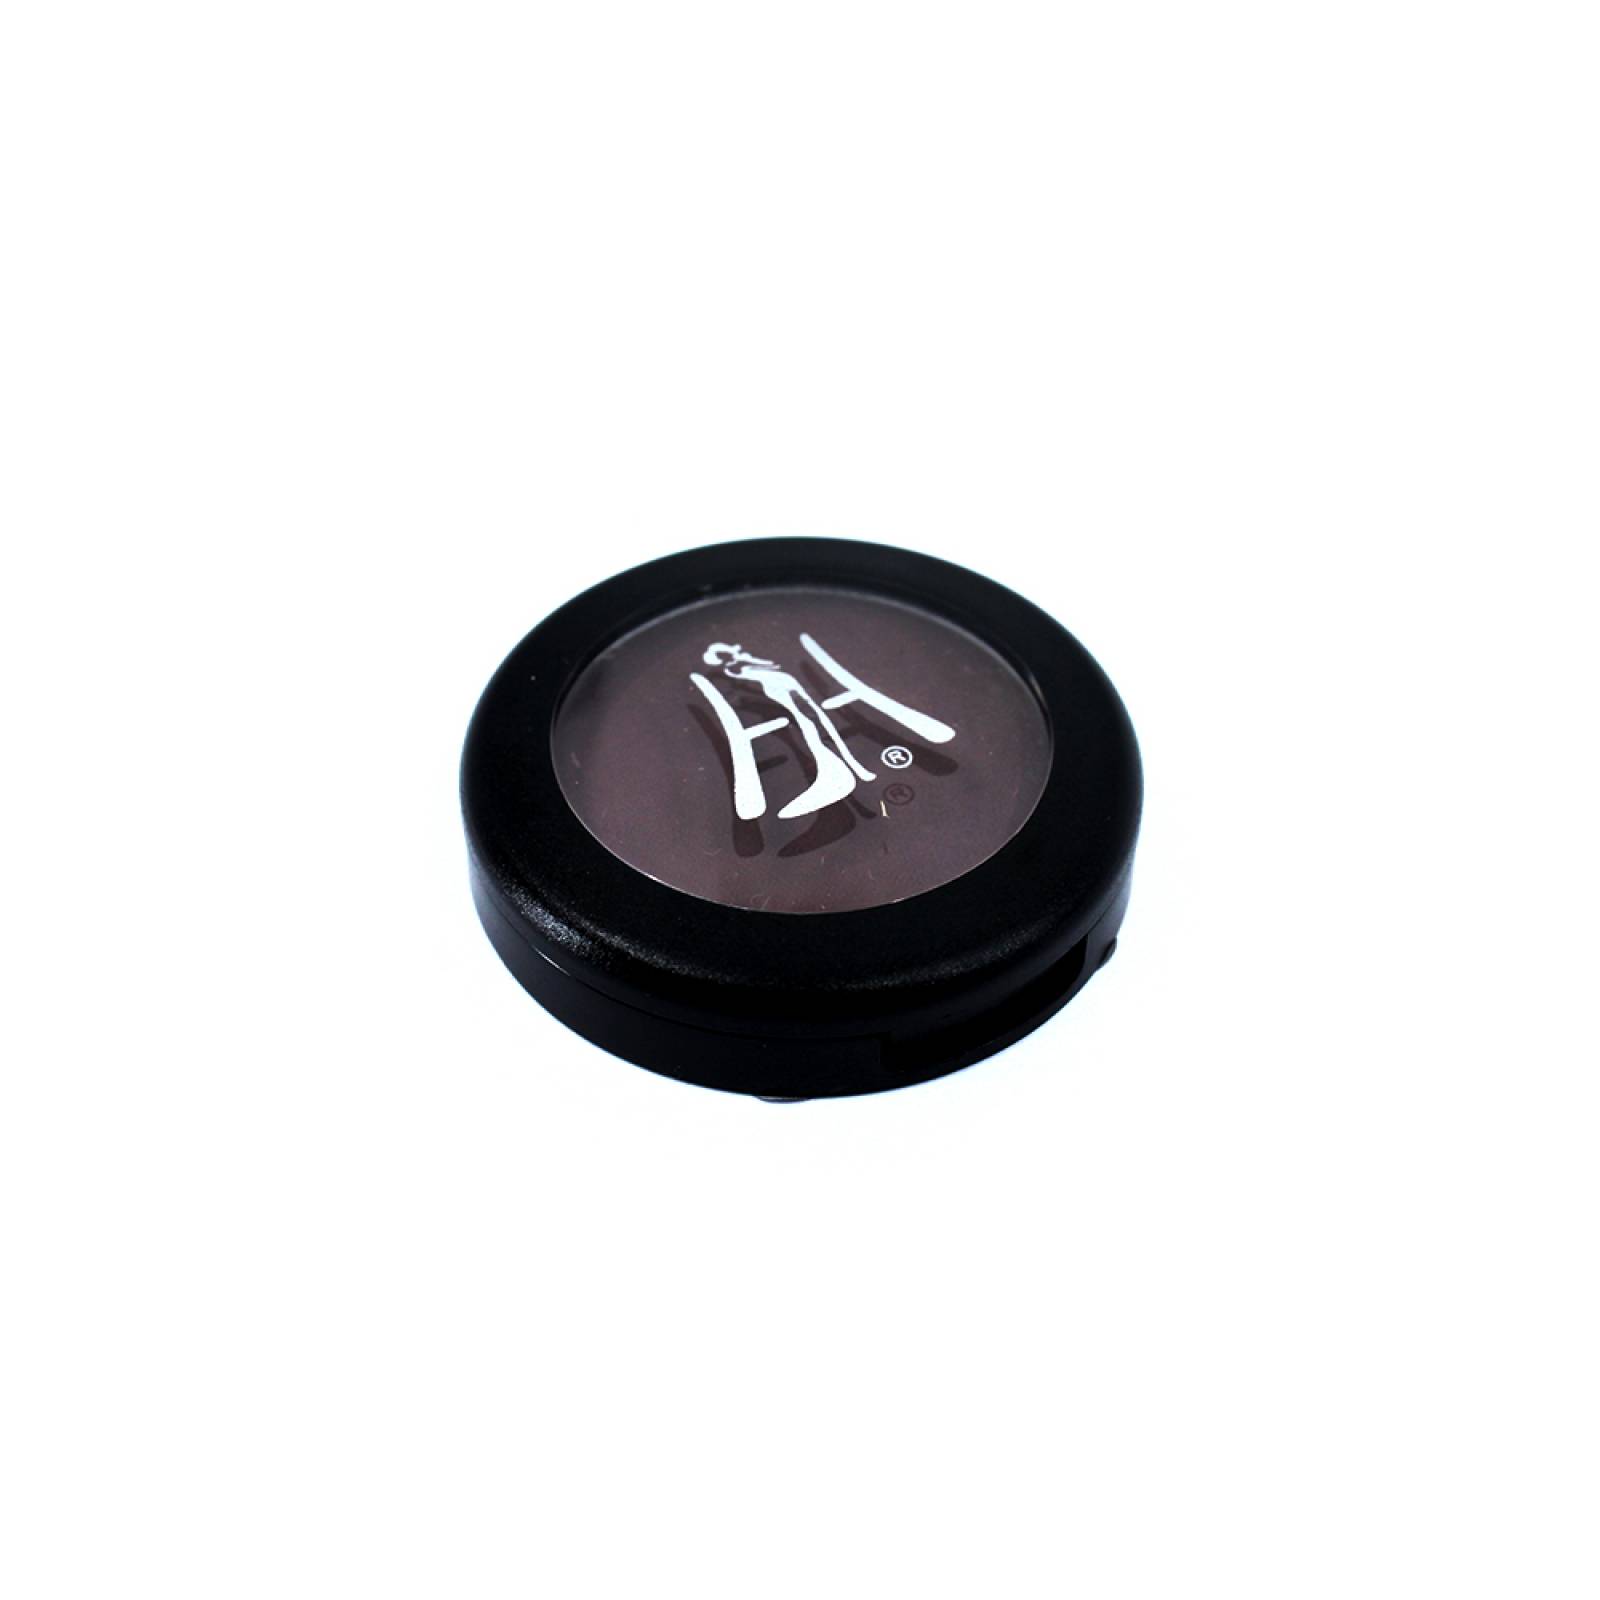 Sombra Ojos Mineral Compacta 1.5 grs Hollywood Image SANGRIA